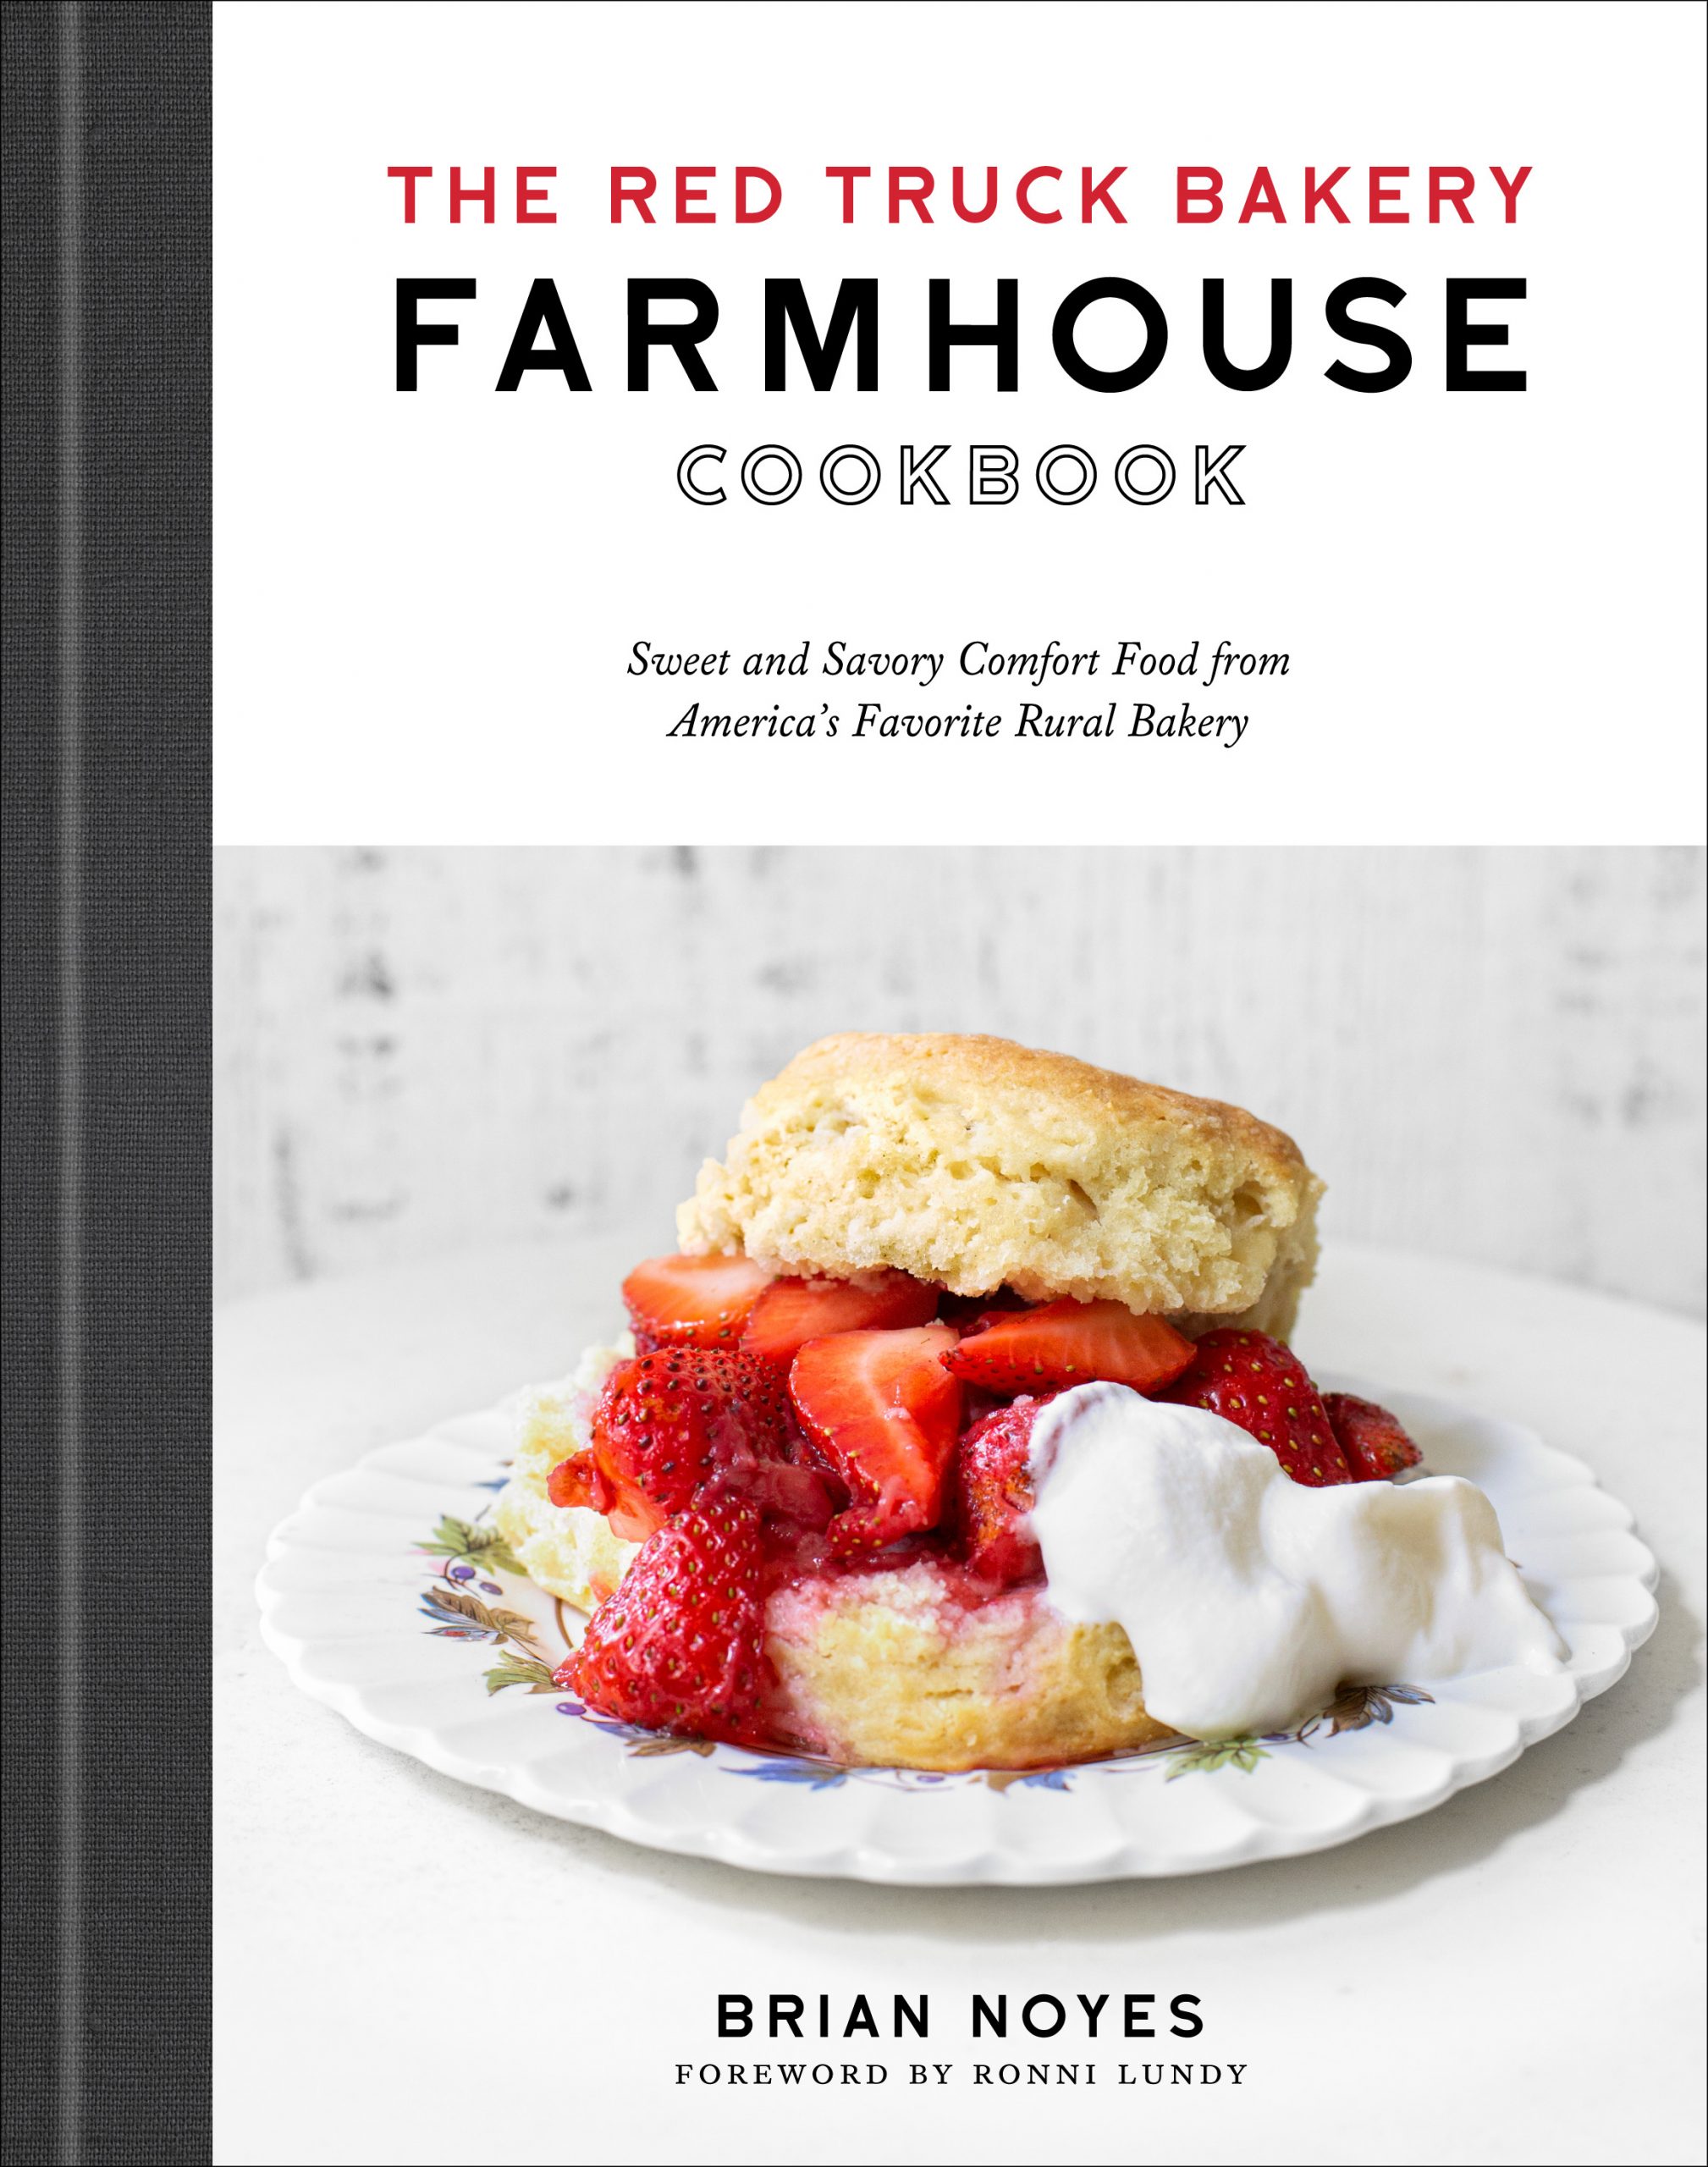 Cookbook cover of THE RED TRUCK BAKERY FARMHOUSE COOKBOOK